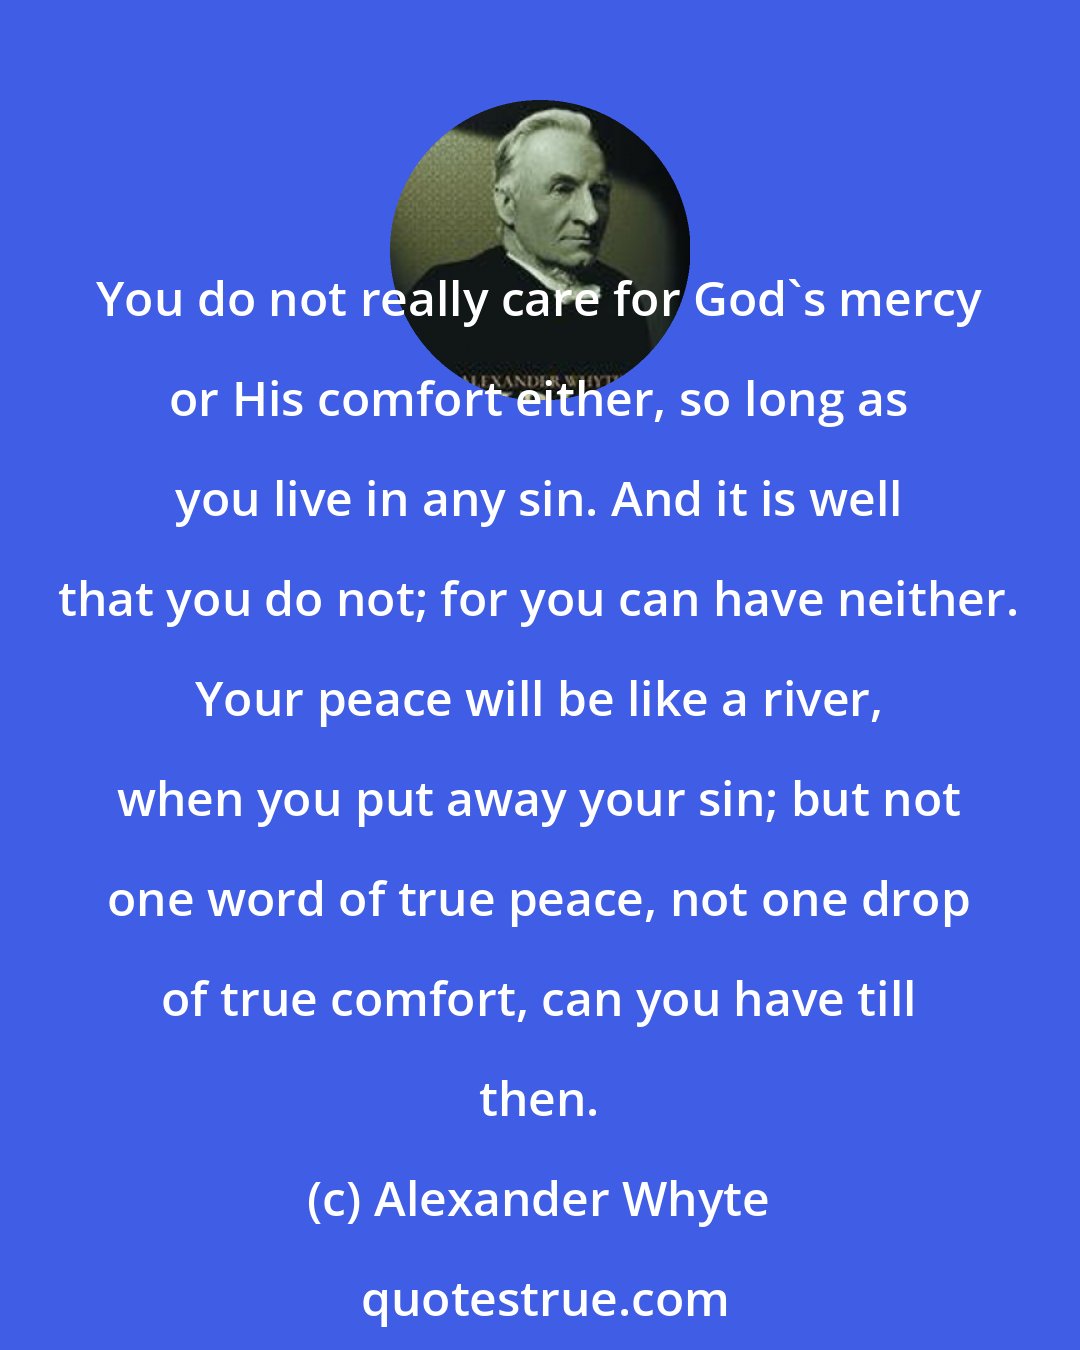 Alexander Whyte: You do not really care for God's mercy or His comfort either, so long as you live in any sin. And it is well that you do not; for you can have neither. Your peace will be like a river, when you put away your sin; but not one word of true peace, not one drop of true comfort, can you have till then.